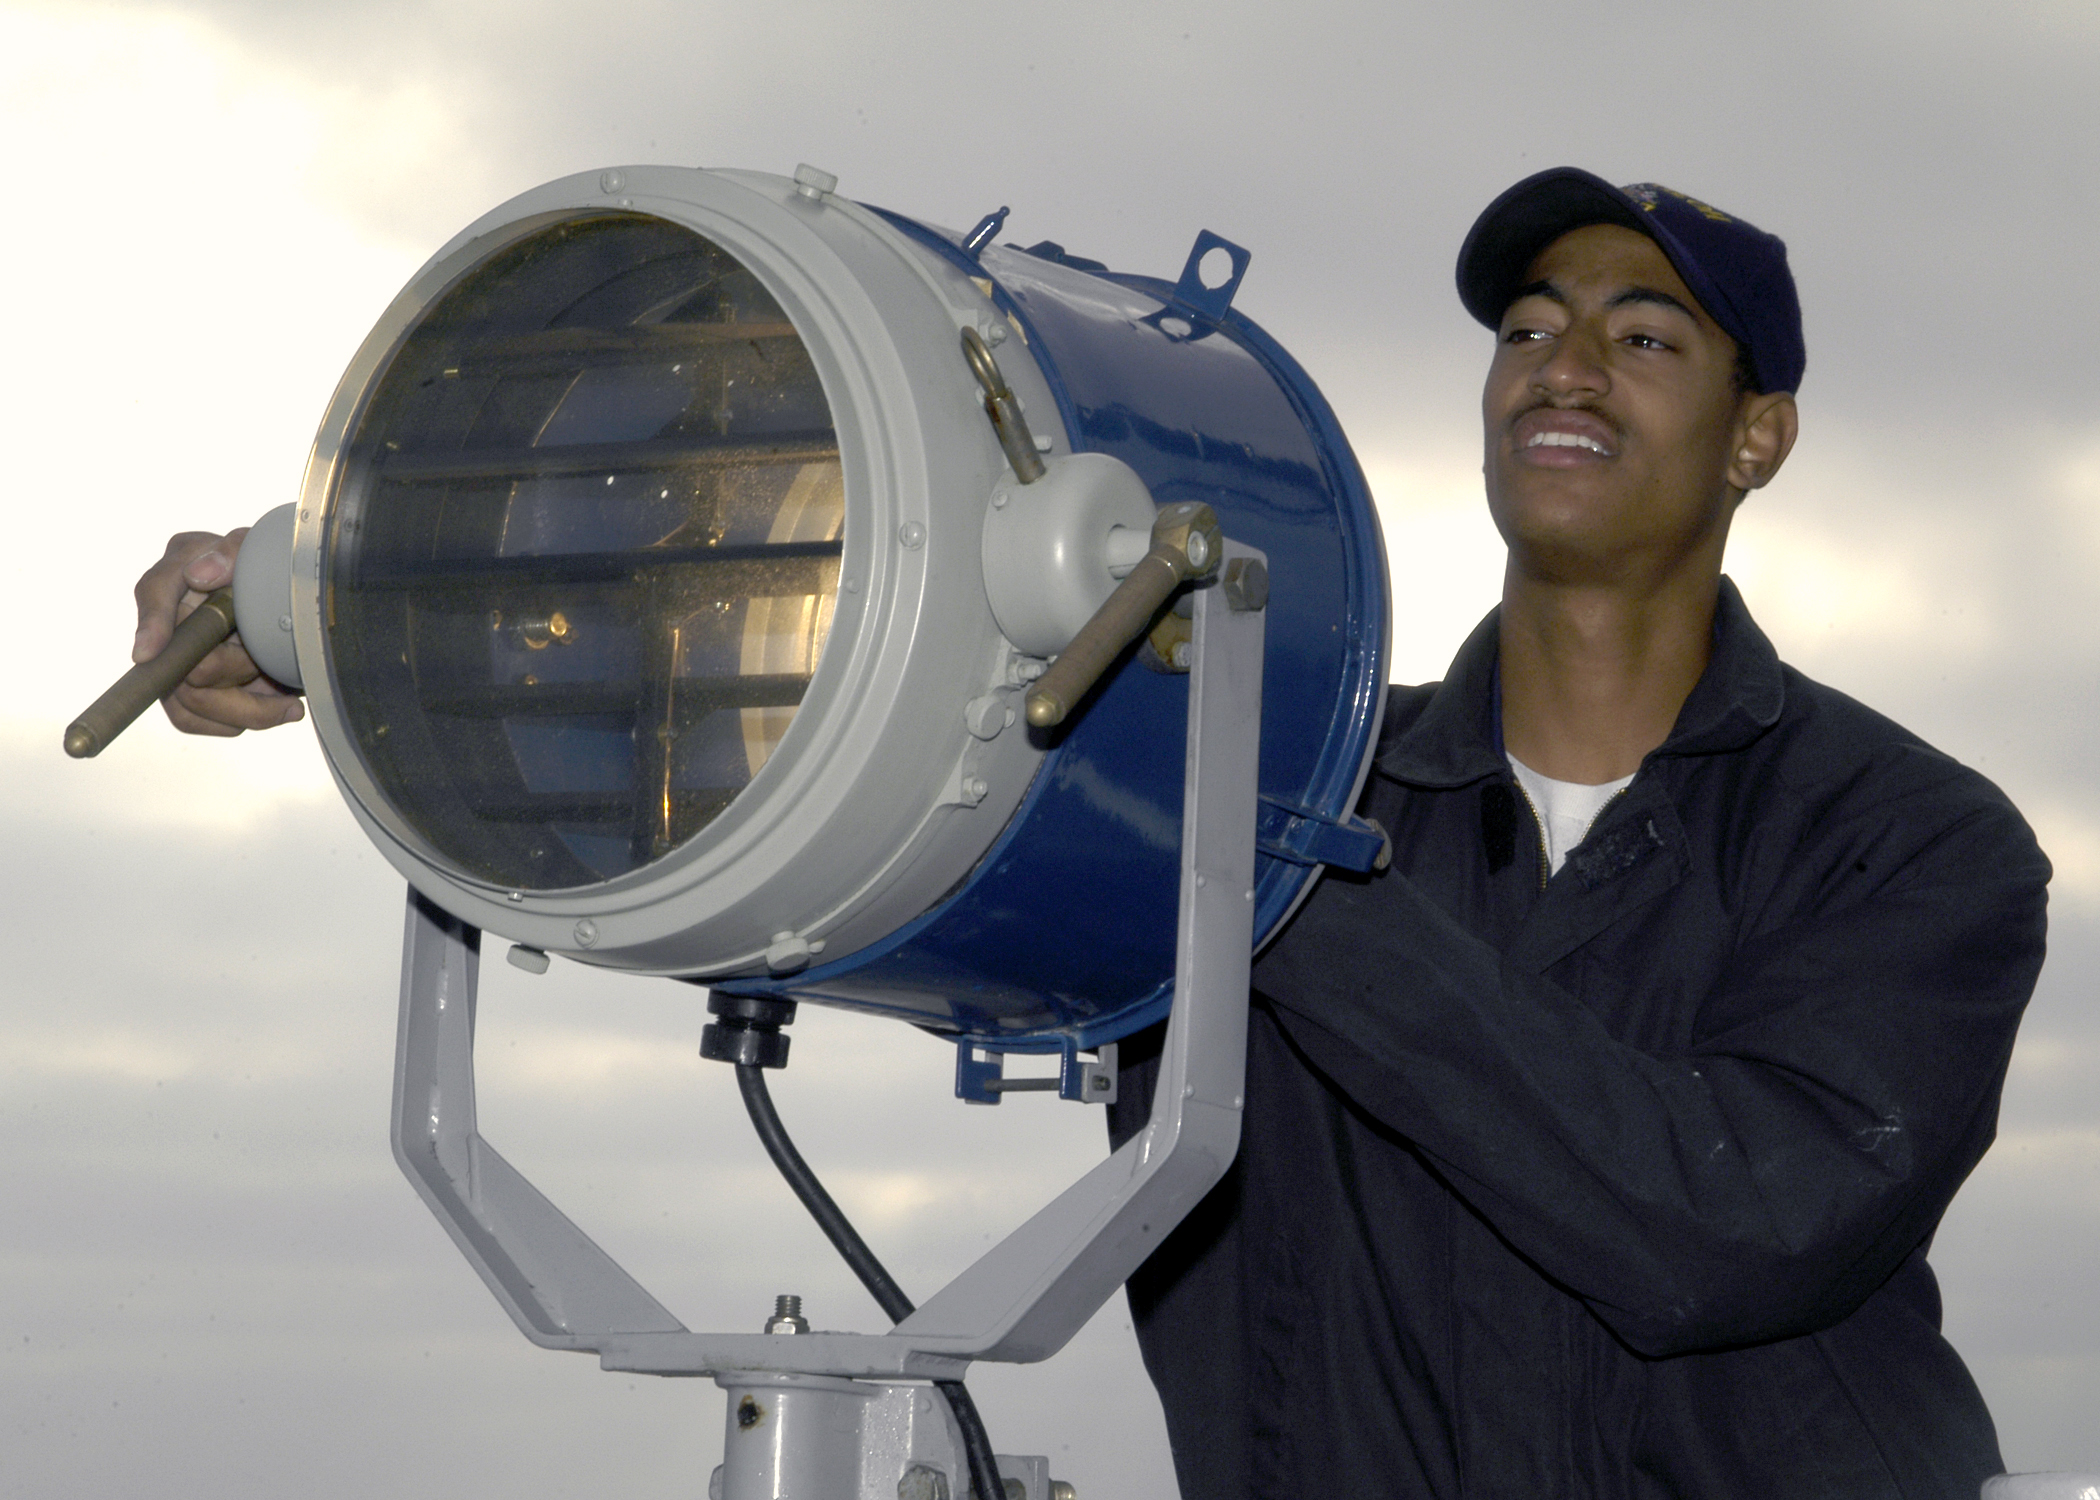 US_Navy_031015-N-9214D-014_Signalman_3rd_Class_Jeff_Allen_uses_a_signal_light_to_communicate_with_other_ships_in_the_vicinity_during_missile_firing_exercises_off_the_coast_of_Southern_California.jpg